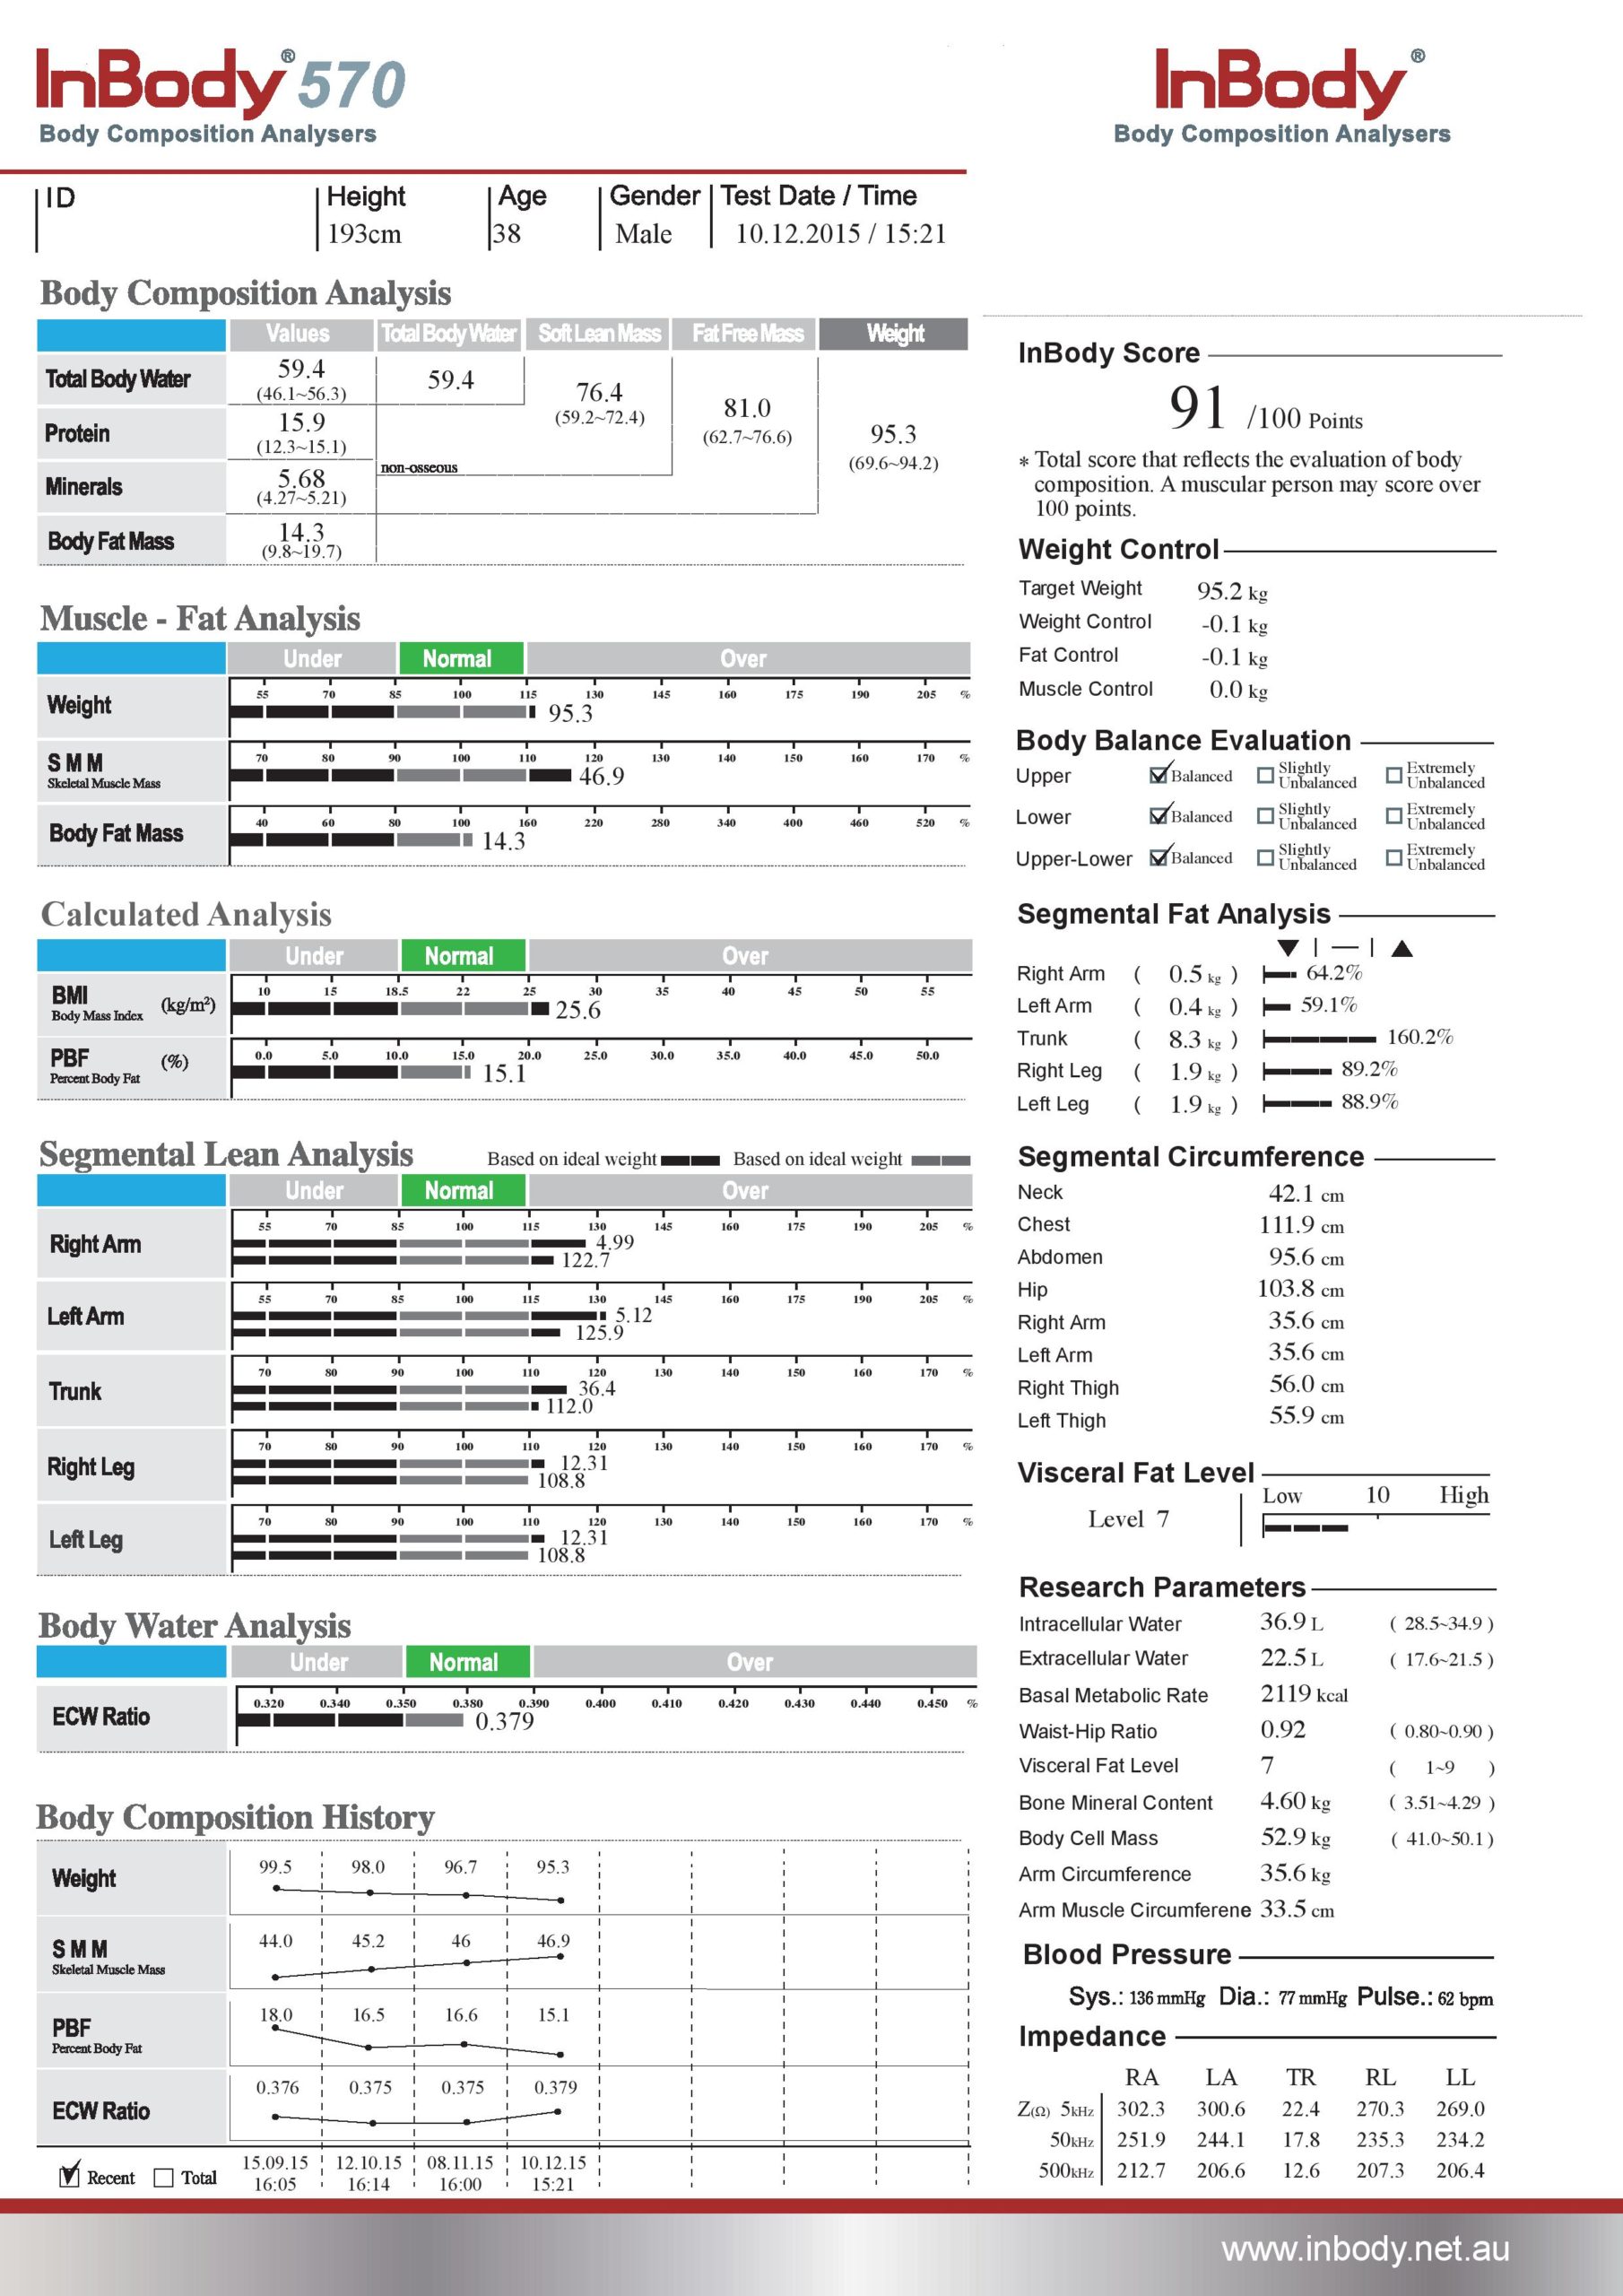 Result Sheet – Tru Body Composition Analysers